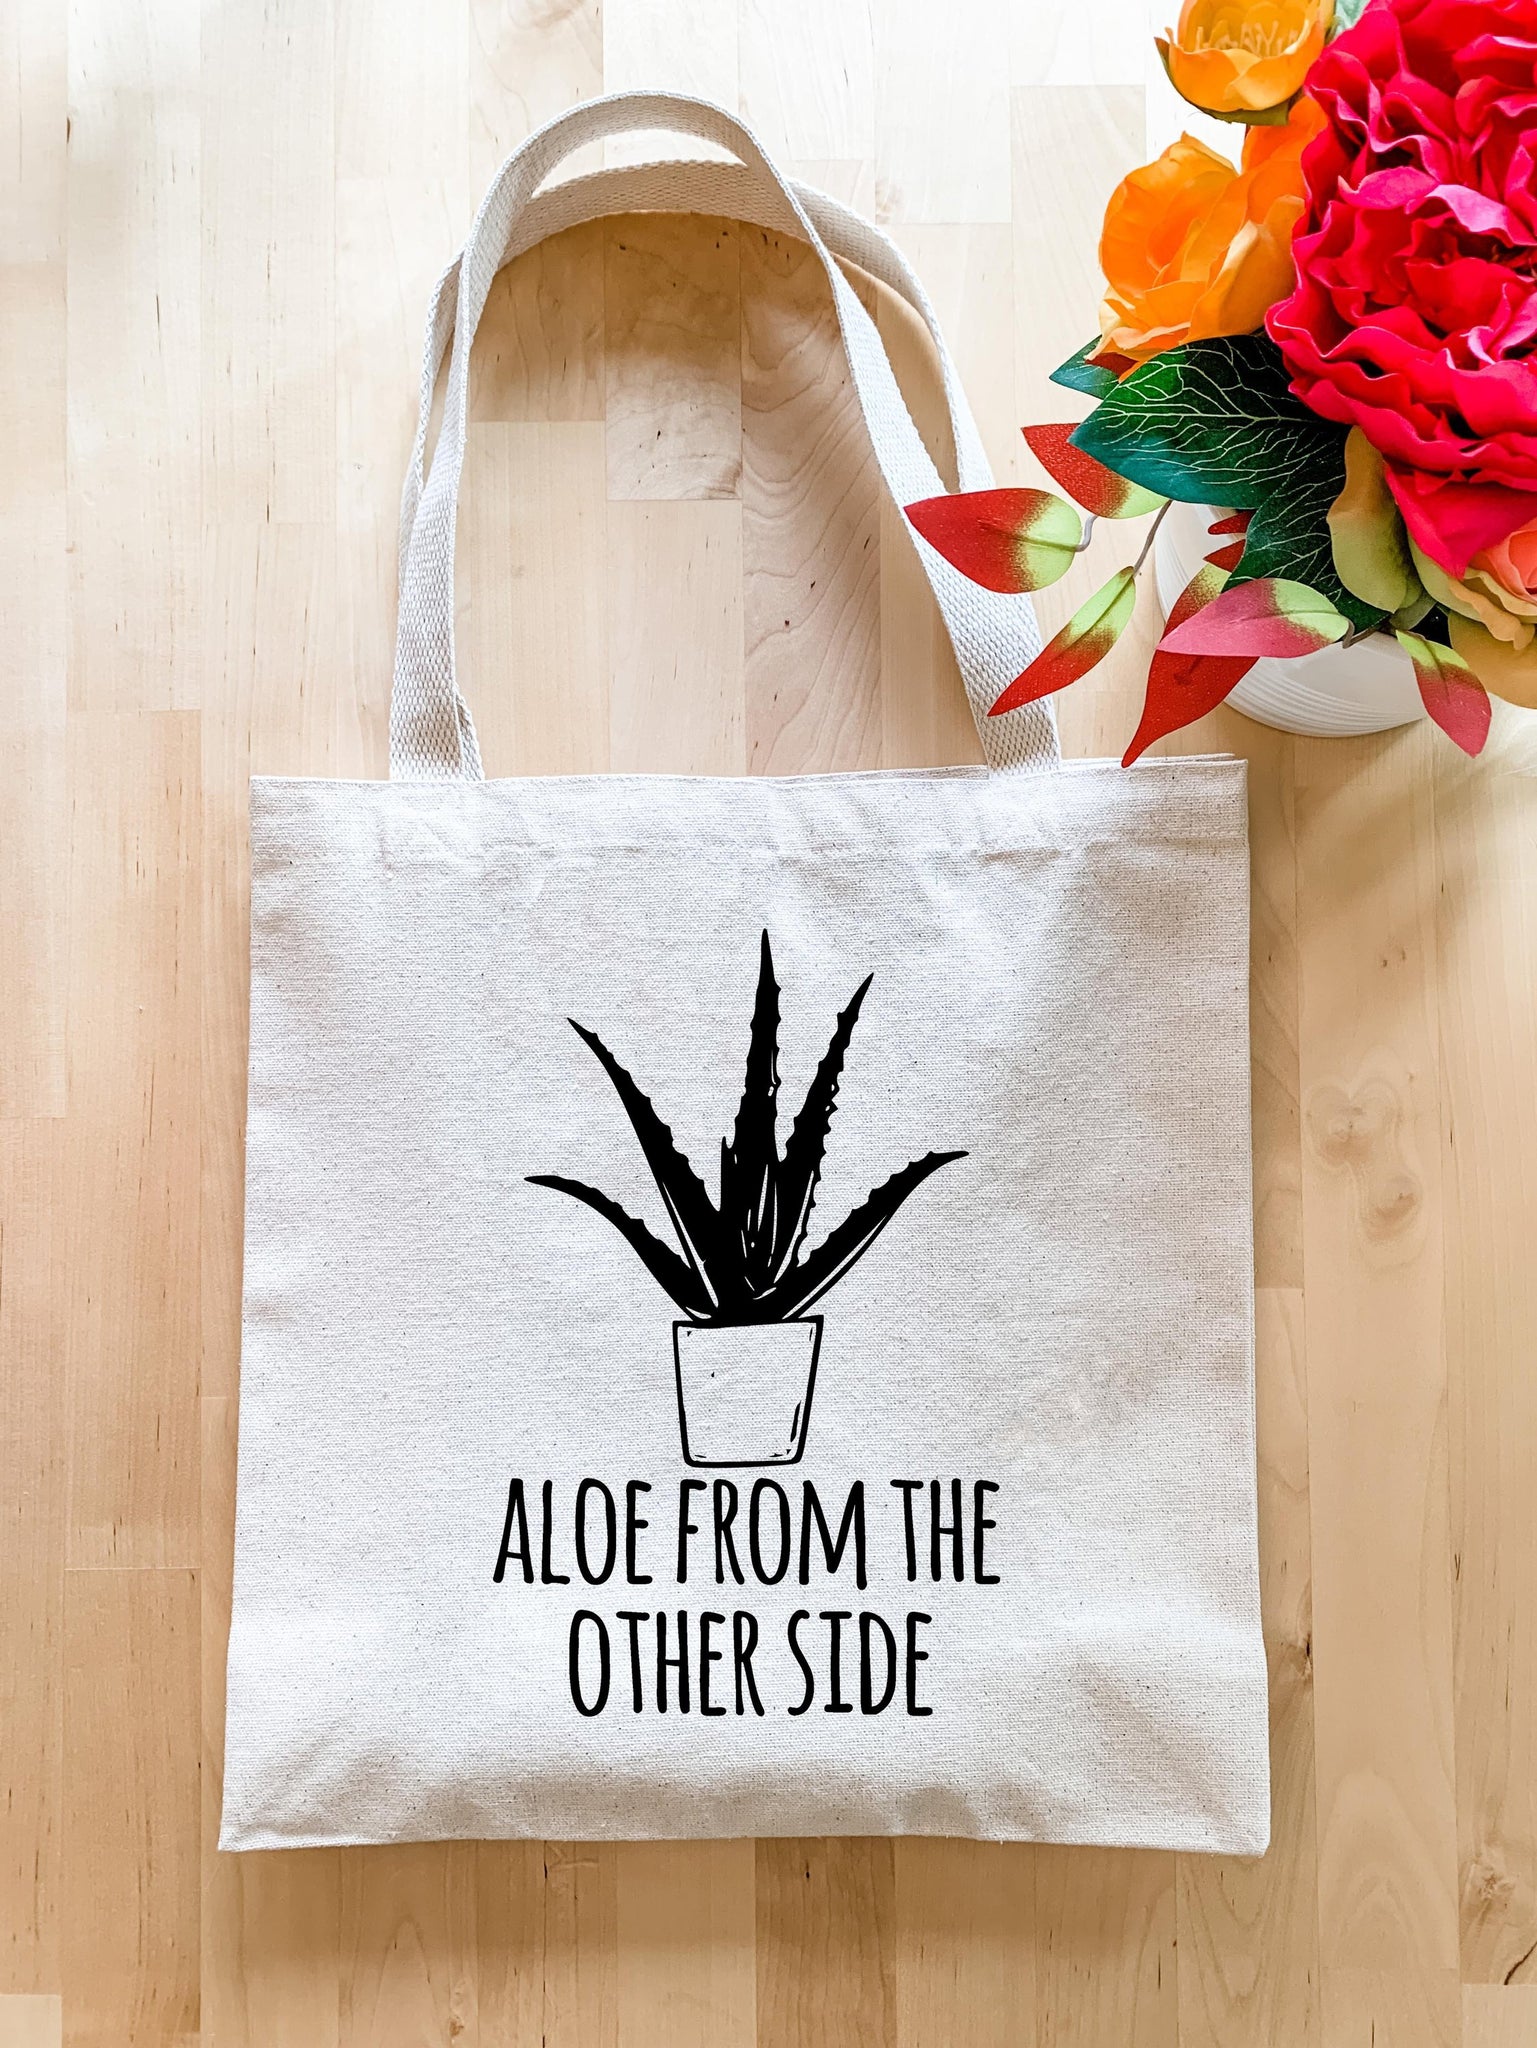 Aloe From The Other Side - Tote Bag - Tech Mall